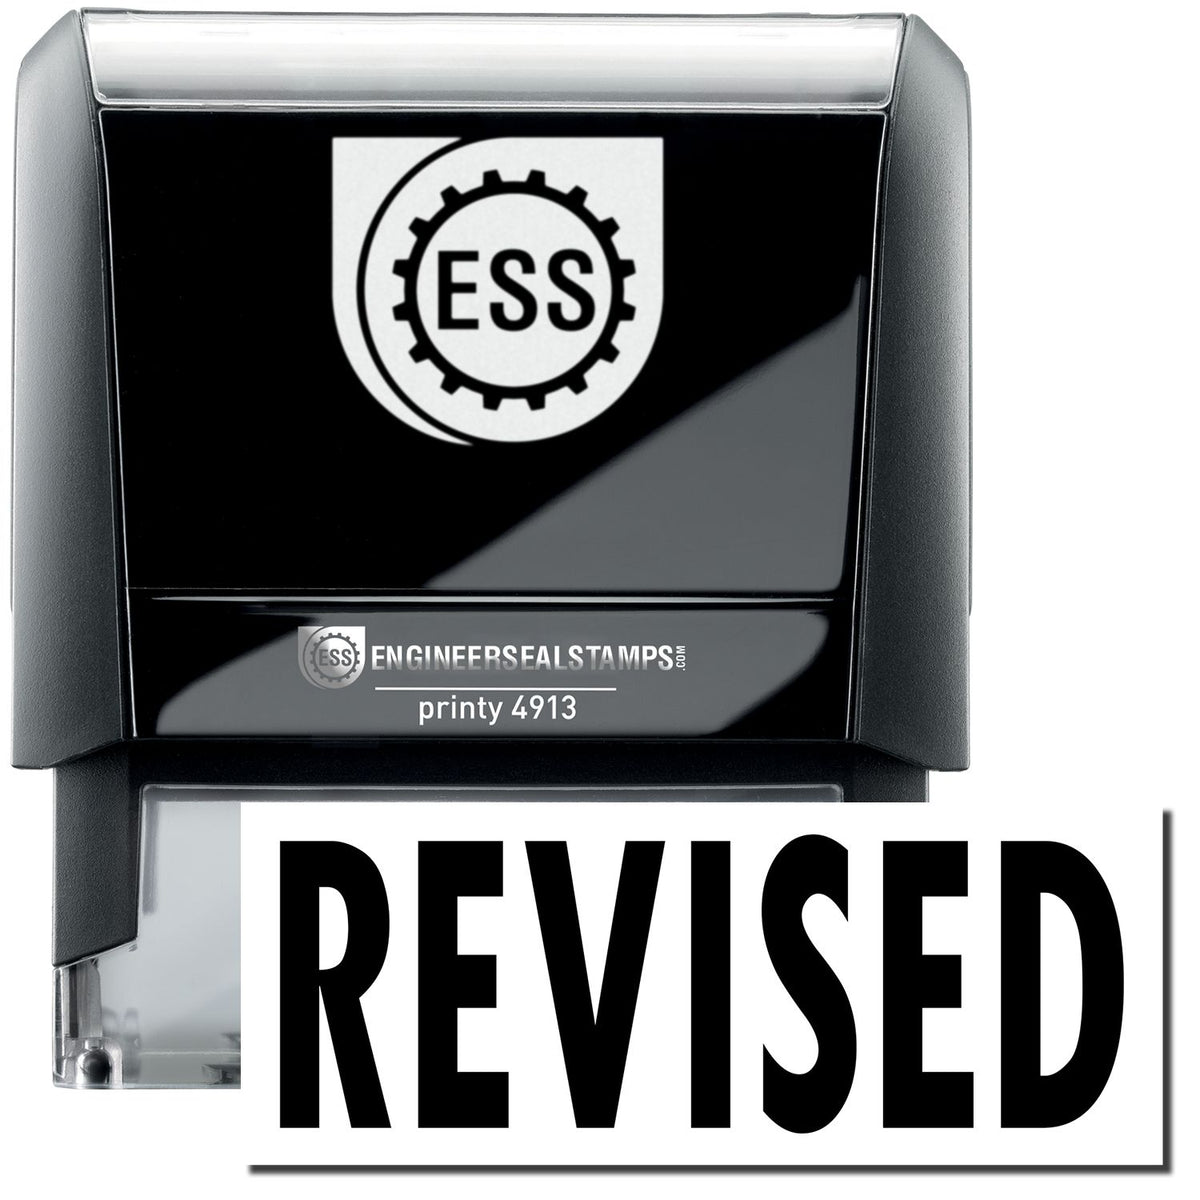 A self-inking stamp with a stamped image showing how the text &quot;REVISED&quot; in a large bold font is displayed by it.